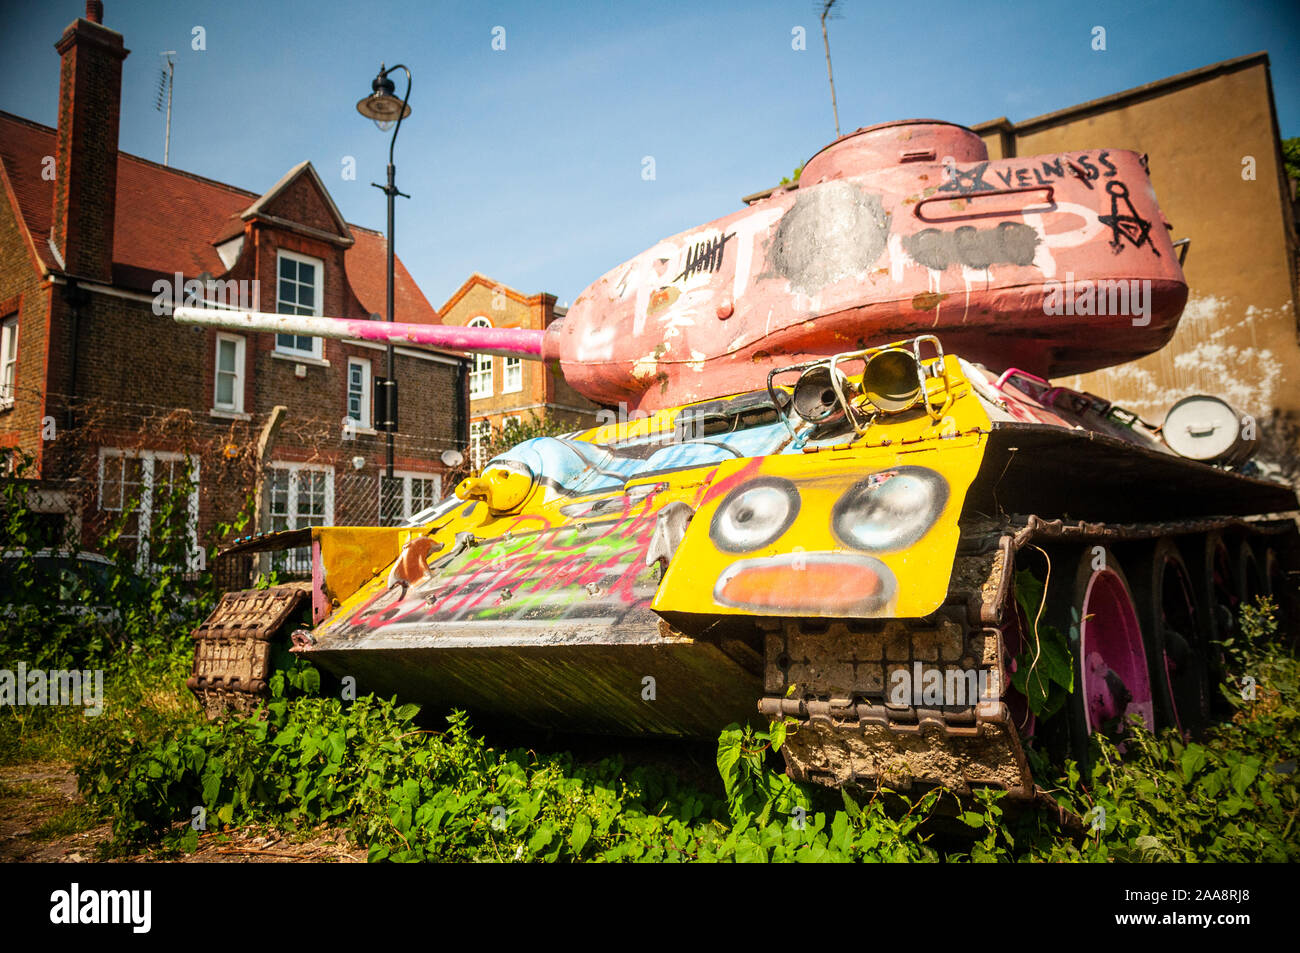 London, England, UK - May 4, 2011: The Mandela Way Tank, a disused Soviet T-34 tank, sits in wasteland off the Old Kent Road in south London. Stock Photo